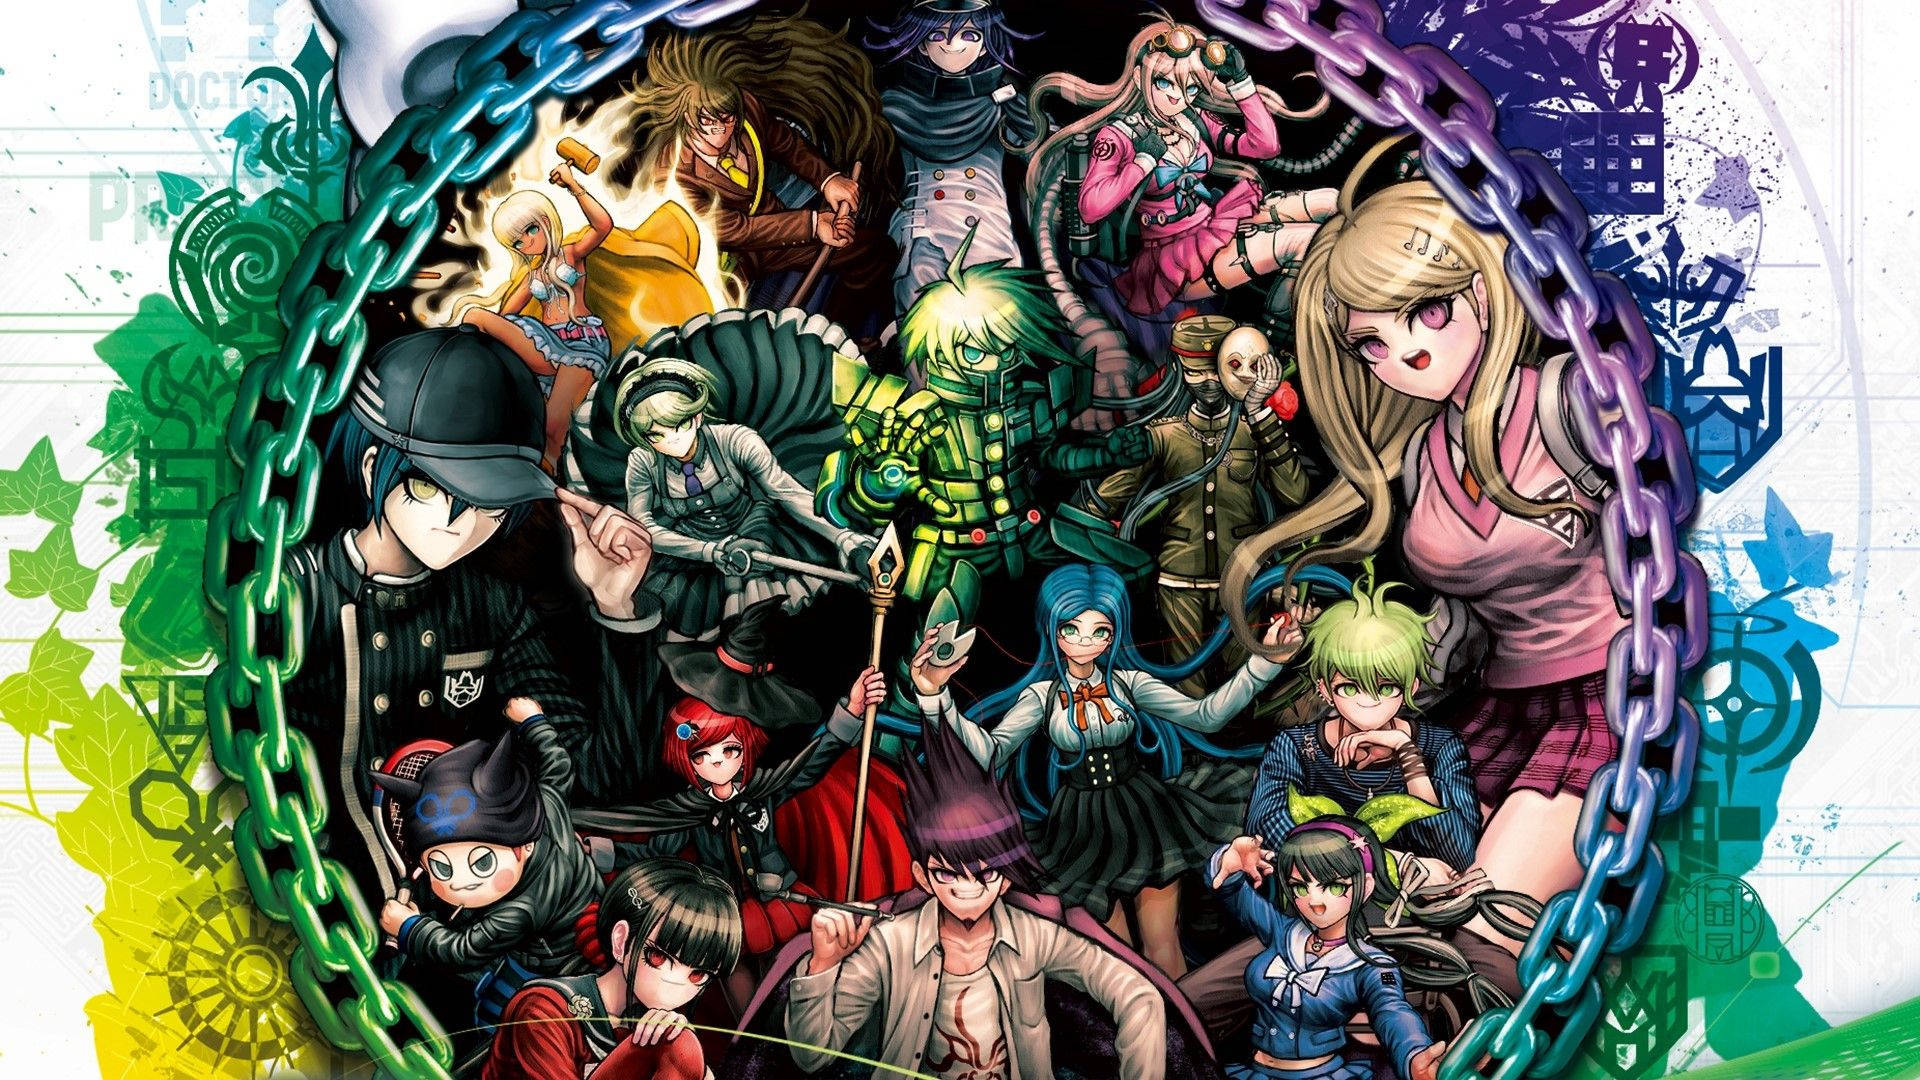 End of a Chapter - Step Into the Future with Danganronpa 3 Wallpaper